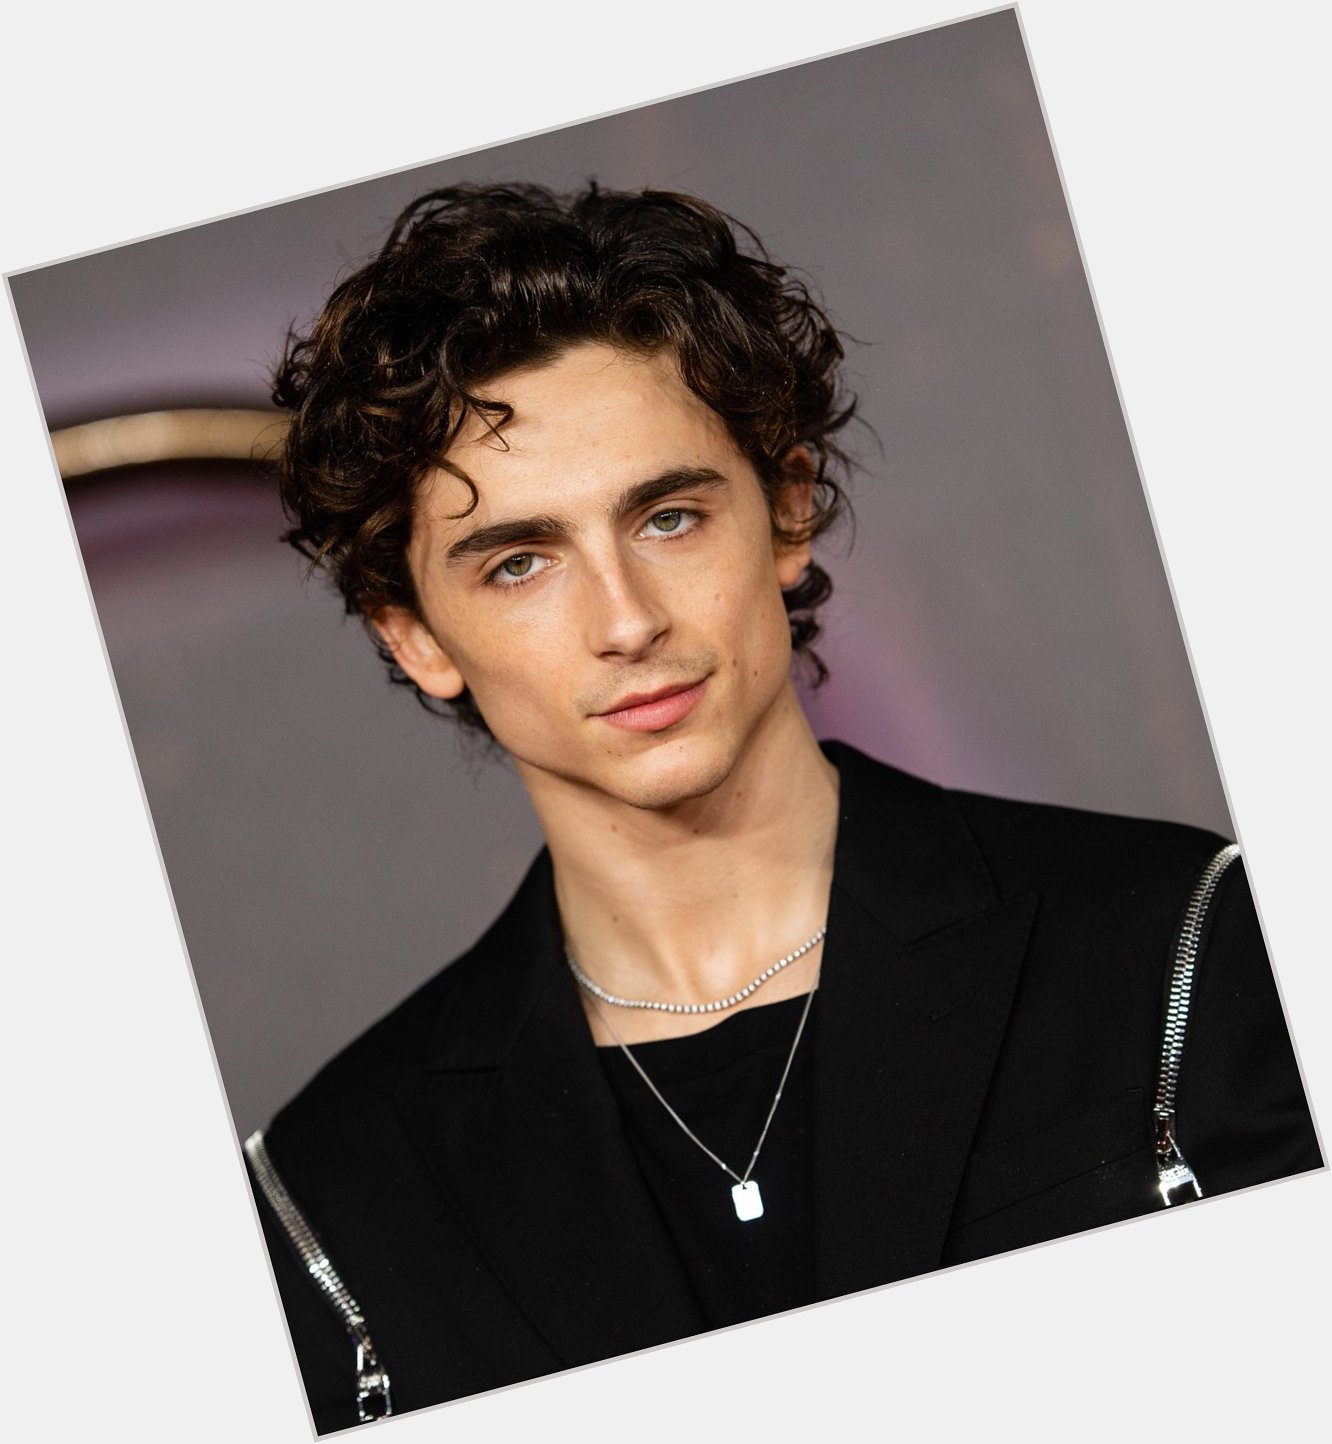 Happy birthday to the talent made person, my favorite boy Timothée Chalamet, love ya!  